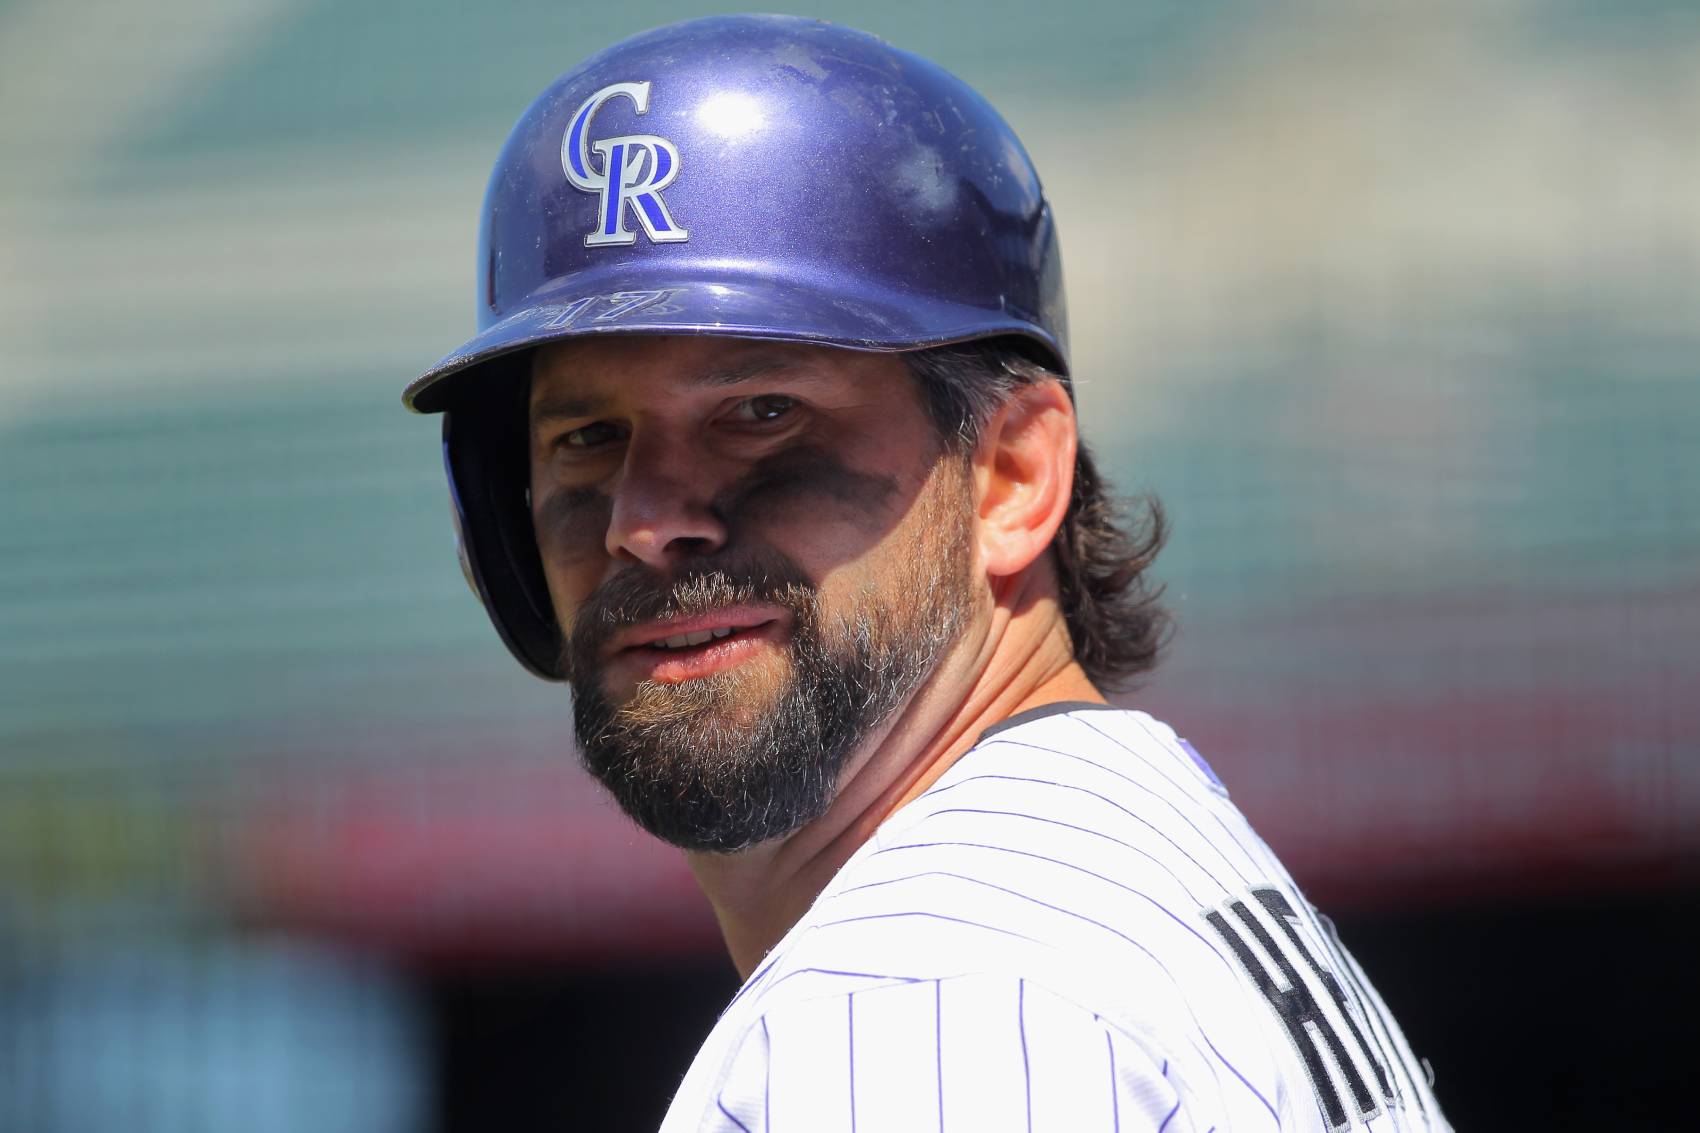 Rockies Legend Todd Helton Quietly Earned Over $160 Million in the Majors